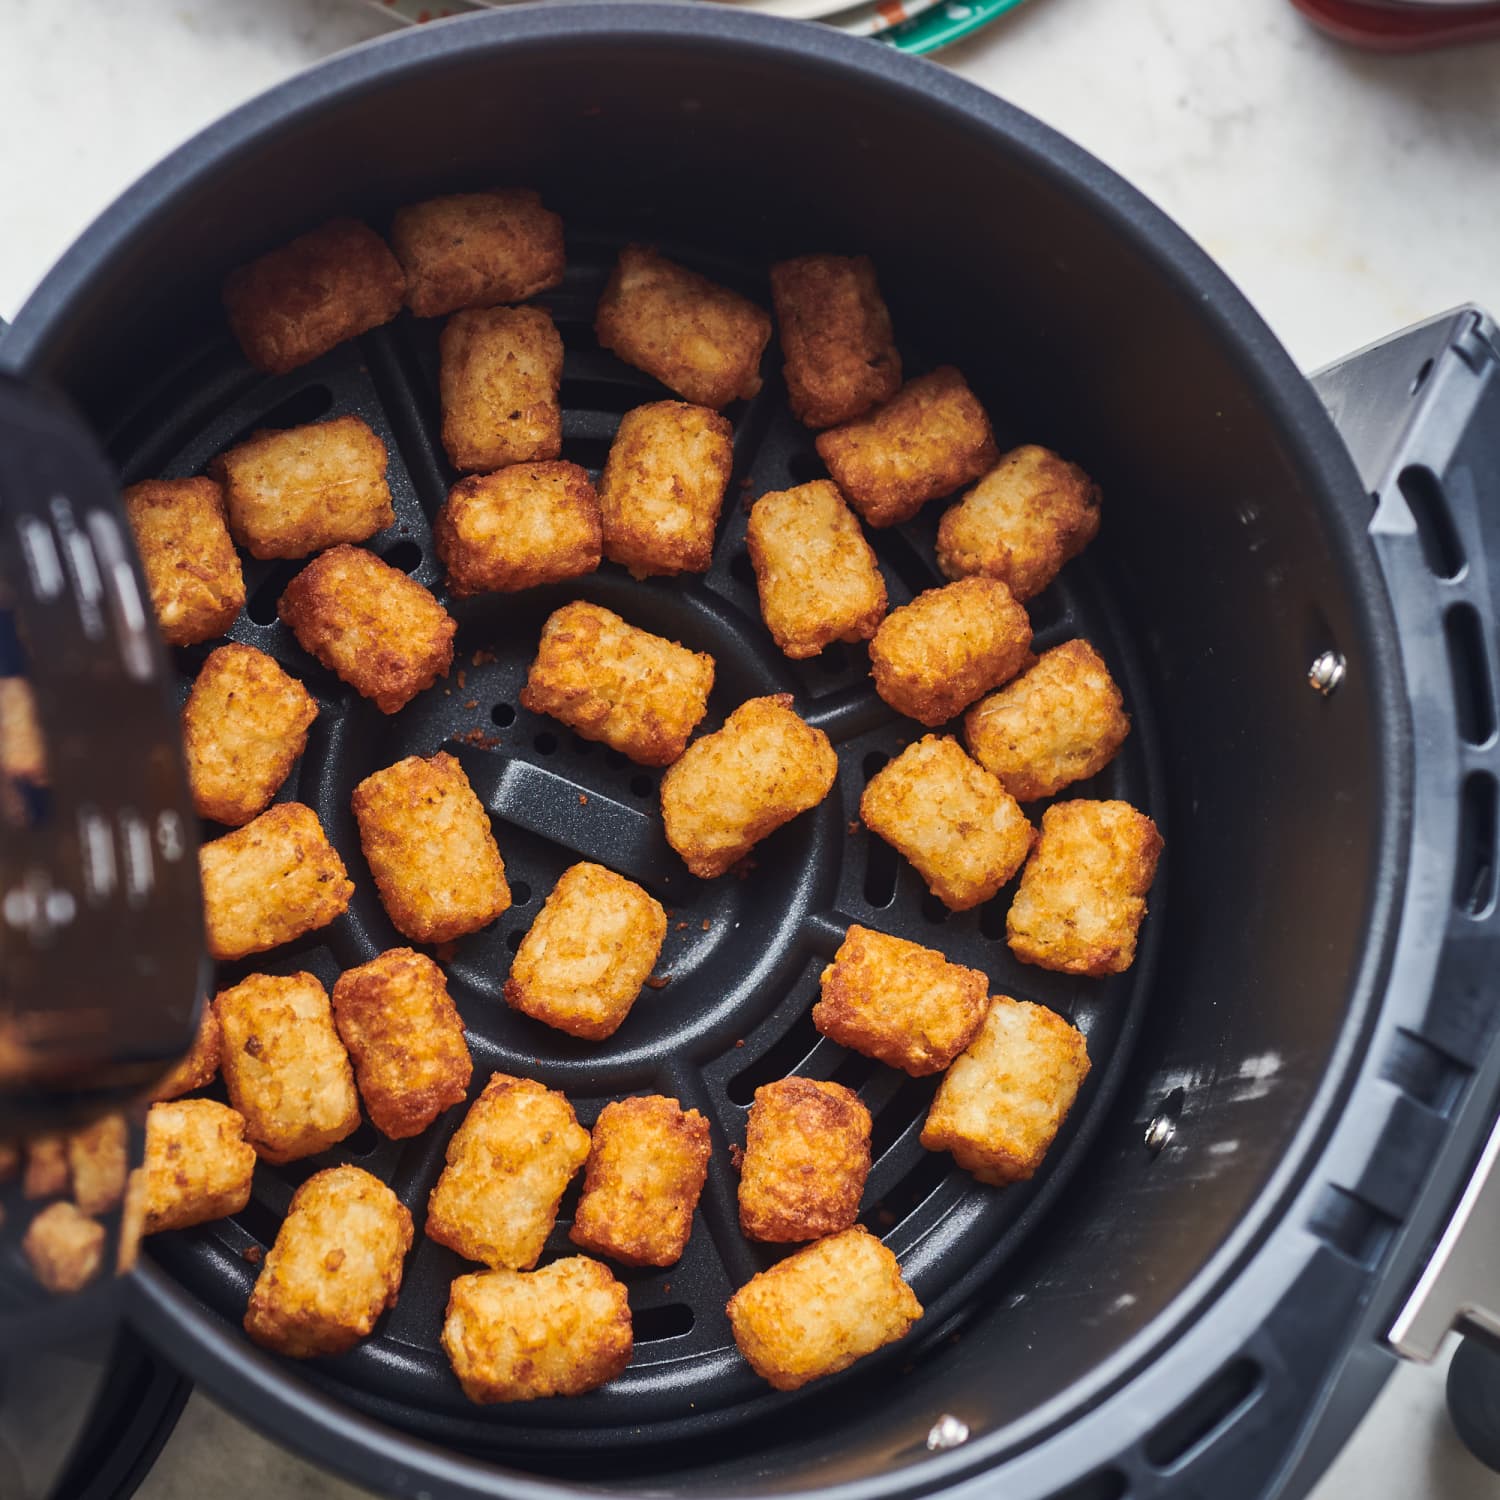 Can You Put Plates in the Air Fryer?